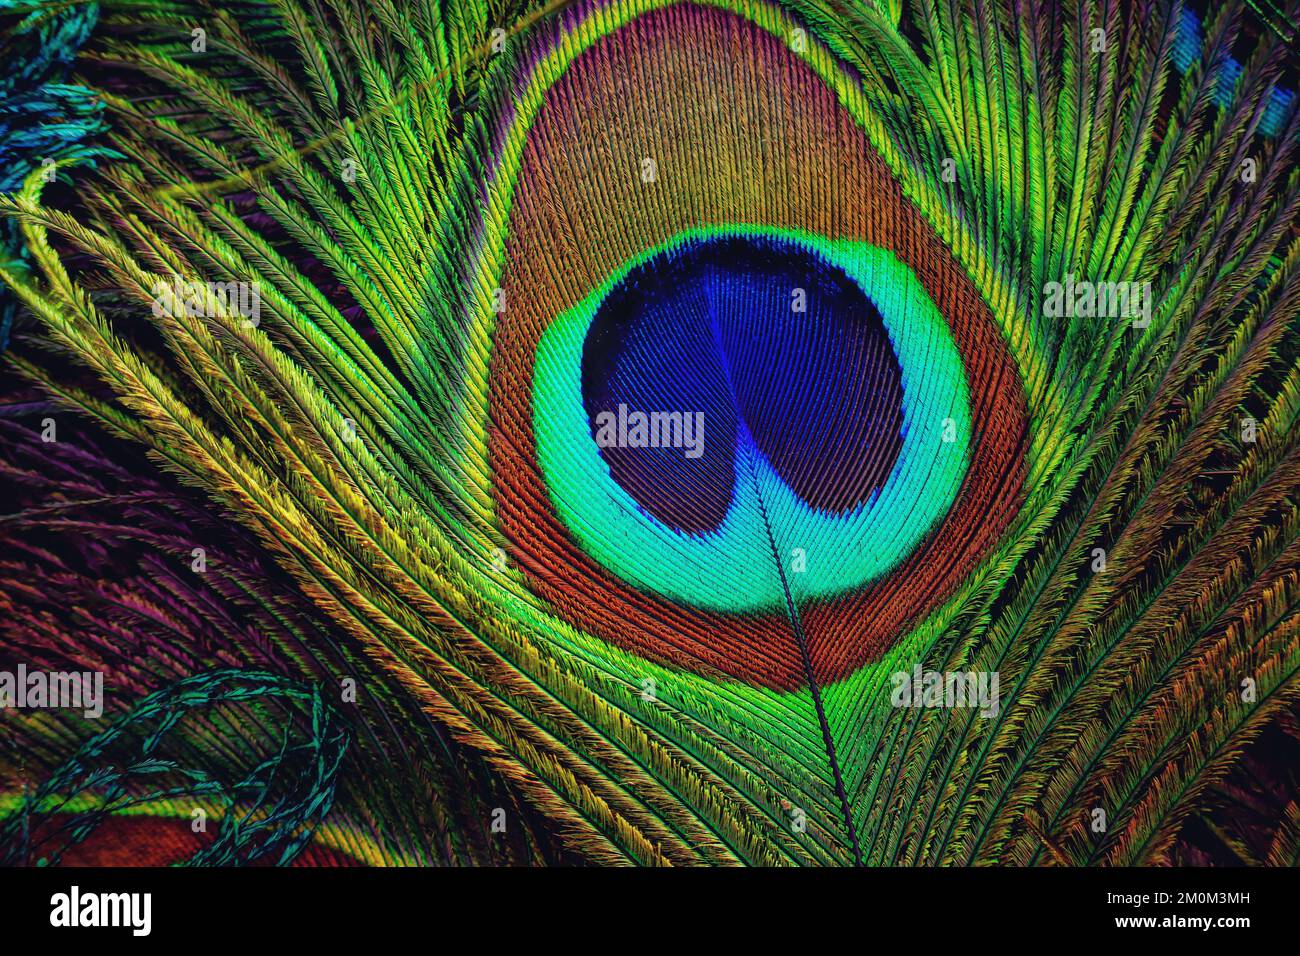 Bright, peacock feather closeup. Single feather isolated. Stock Photo